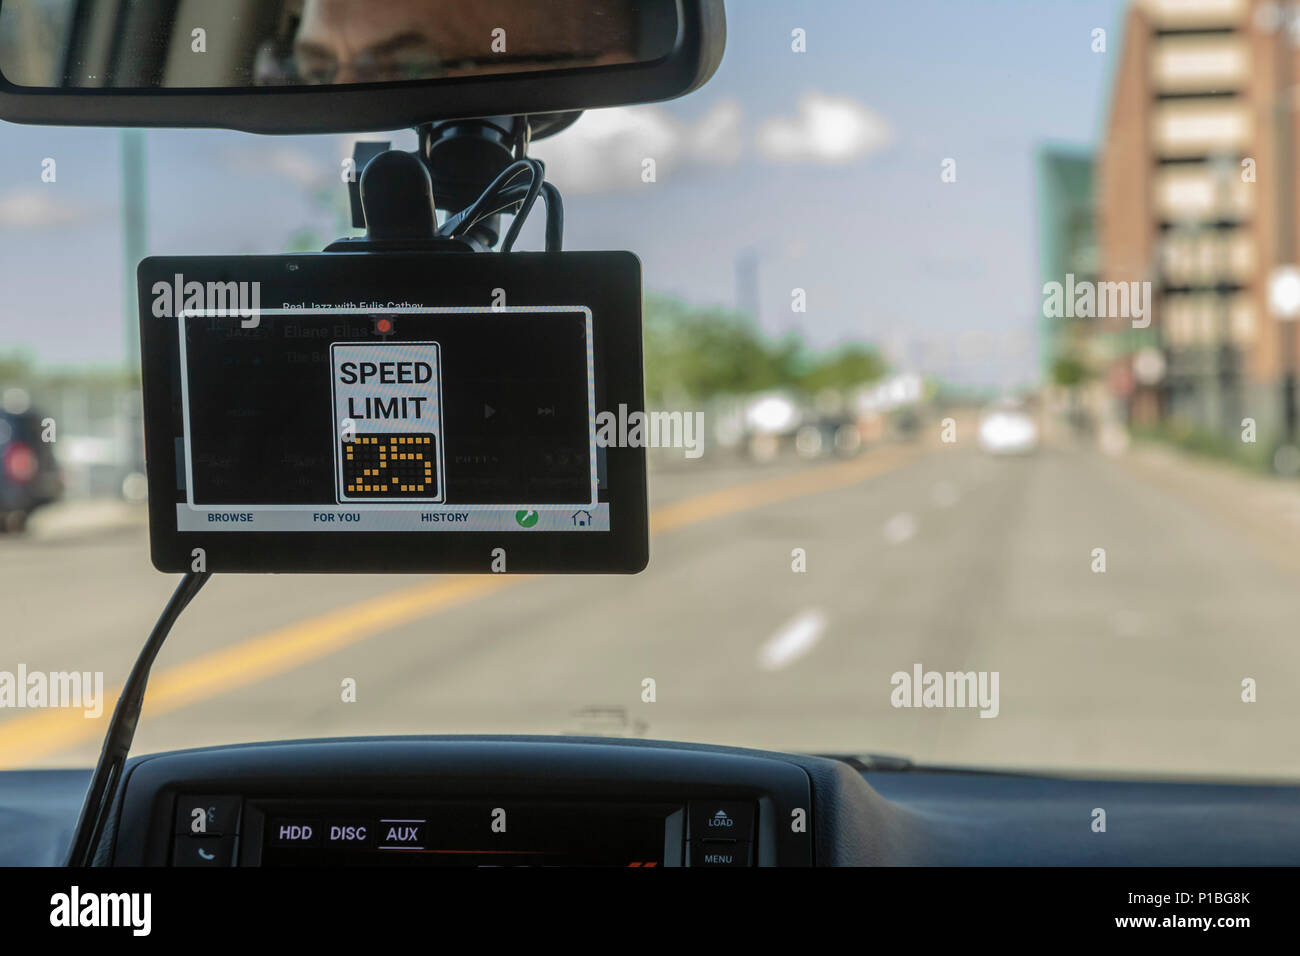 Detroit, Michigan - A demonstration of connected vehicle technology at the Intelligent Transportation Society of America annual meeting. An in-car dis Stock Photo